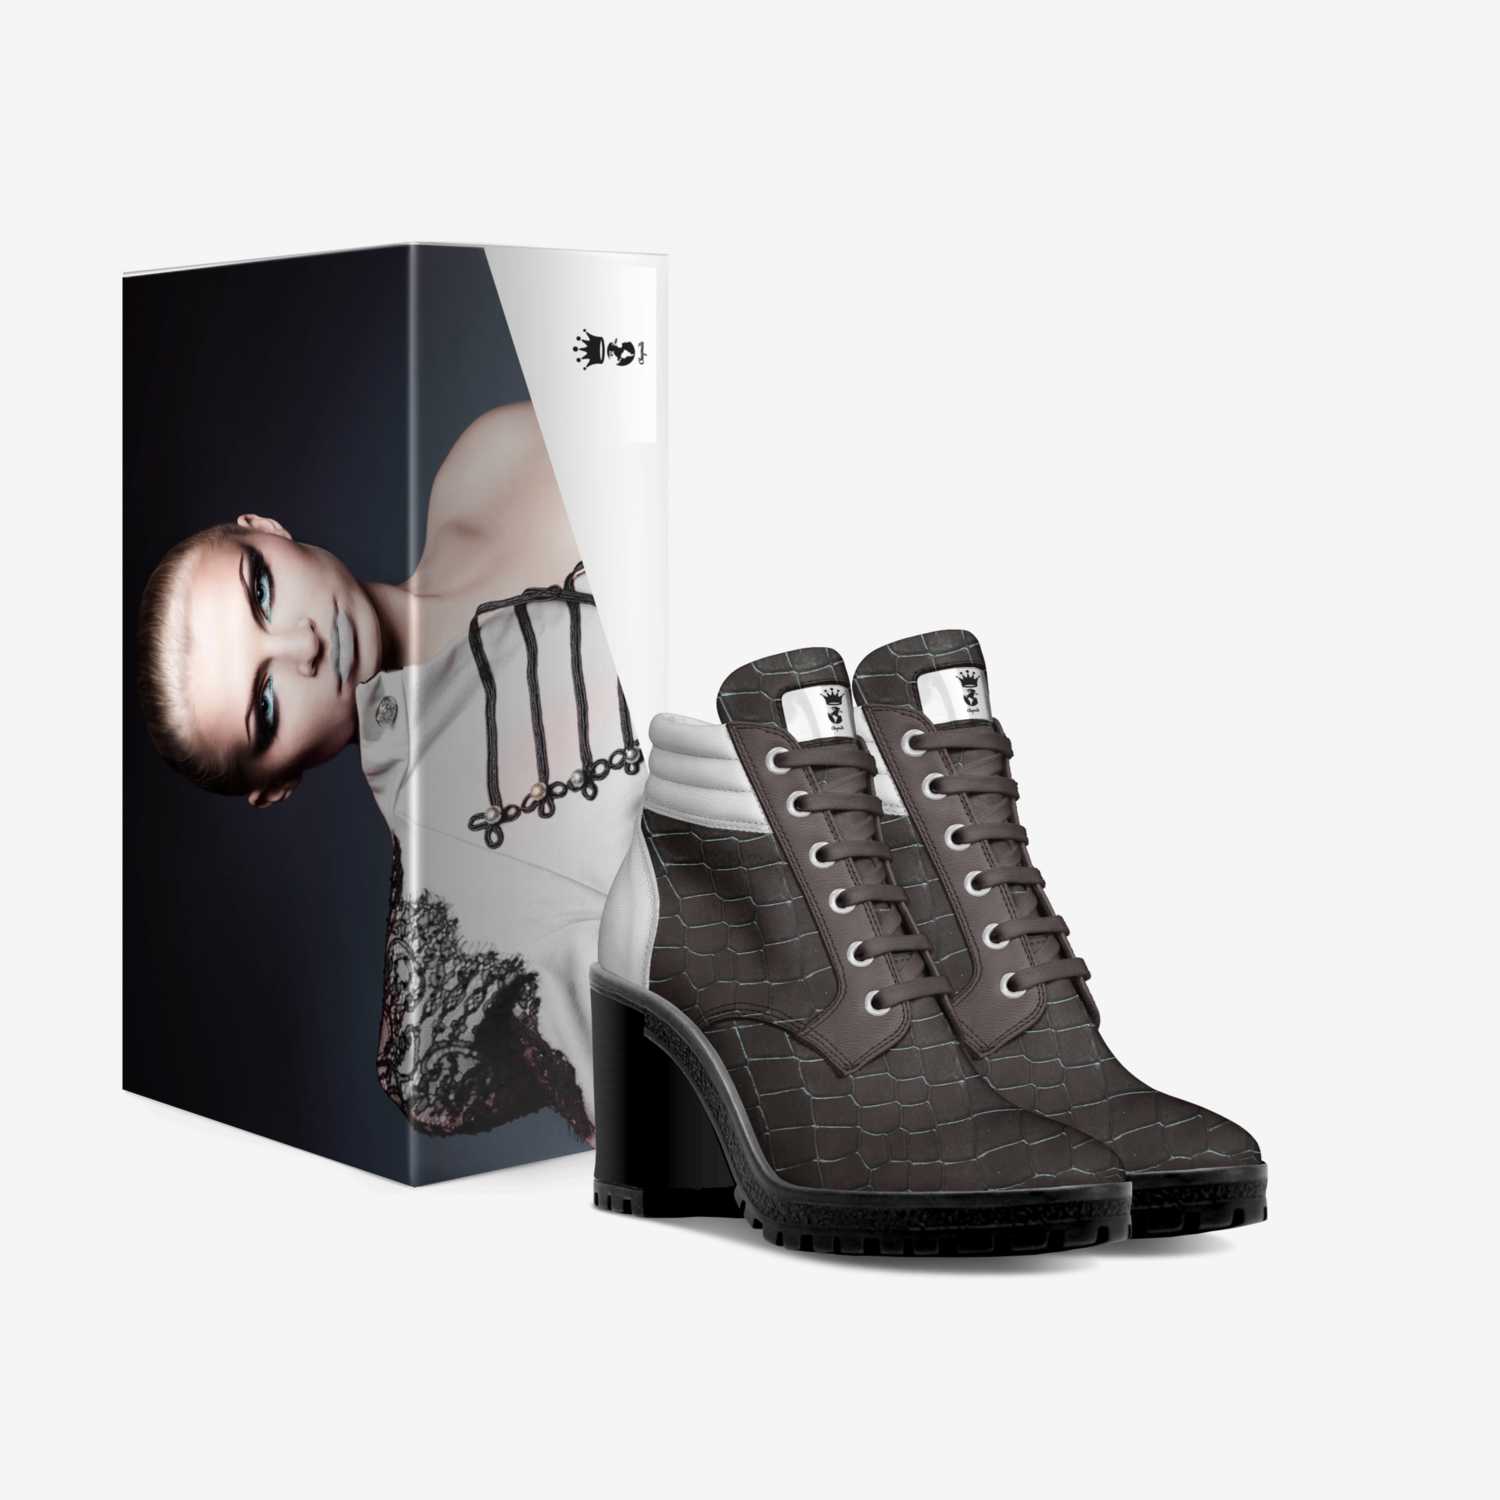 CheqMate- Queen custom made in Italy shoes by Julius Bouler | Box view